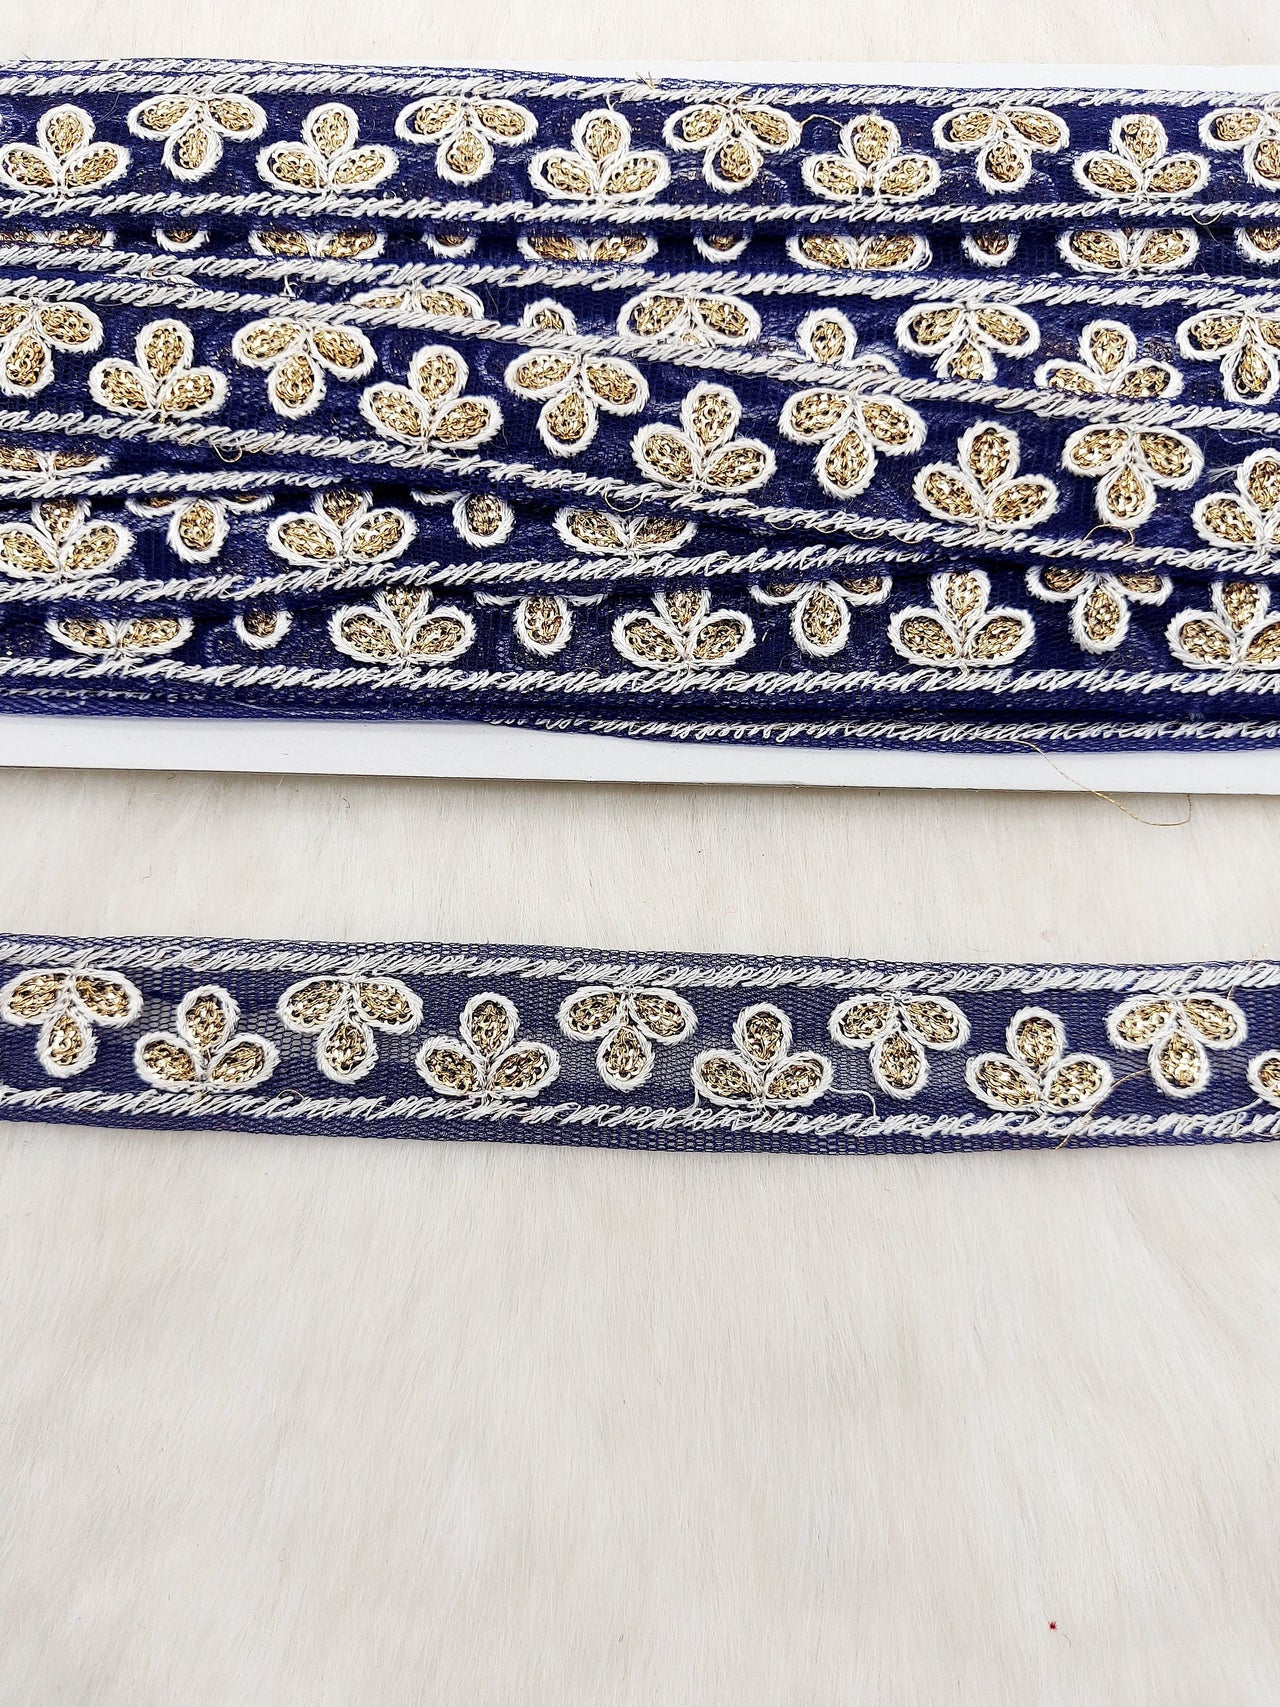 Wholesale Navy Blue Net Lace Floral Embroidery & Glitter Gold Sequins, Indian Wedding Border, Gifting Ribbon Costume Trim Fashion Trimming